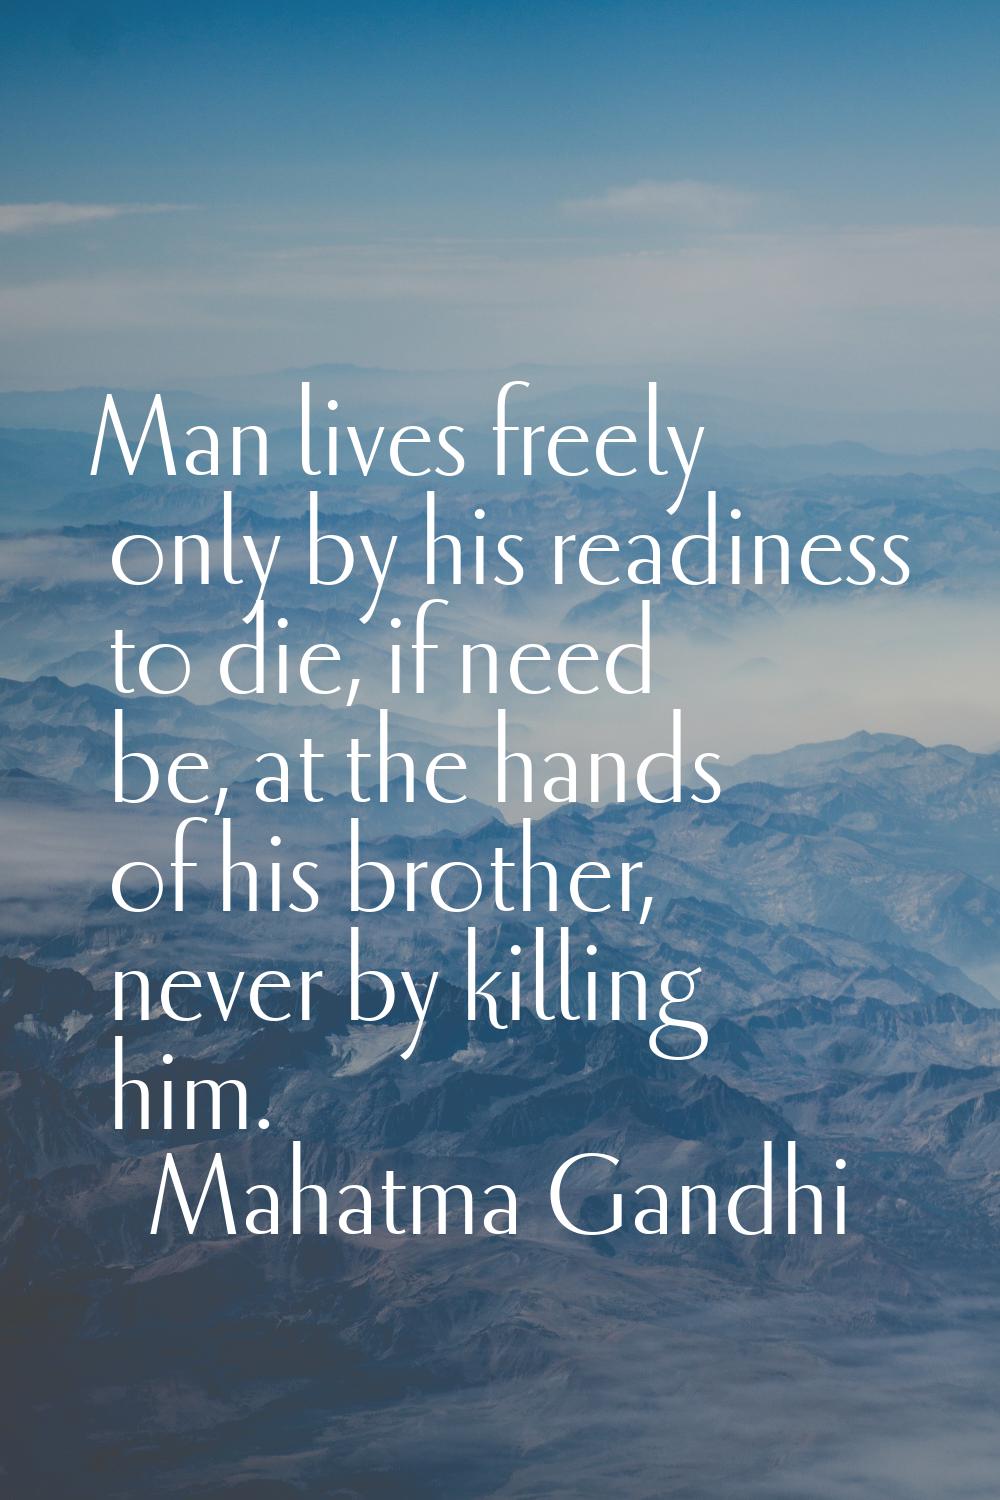 Man lives freely only by his readiness to die, if need be, at the hands of his brother, never by ki